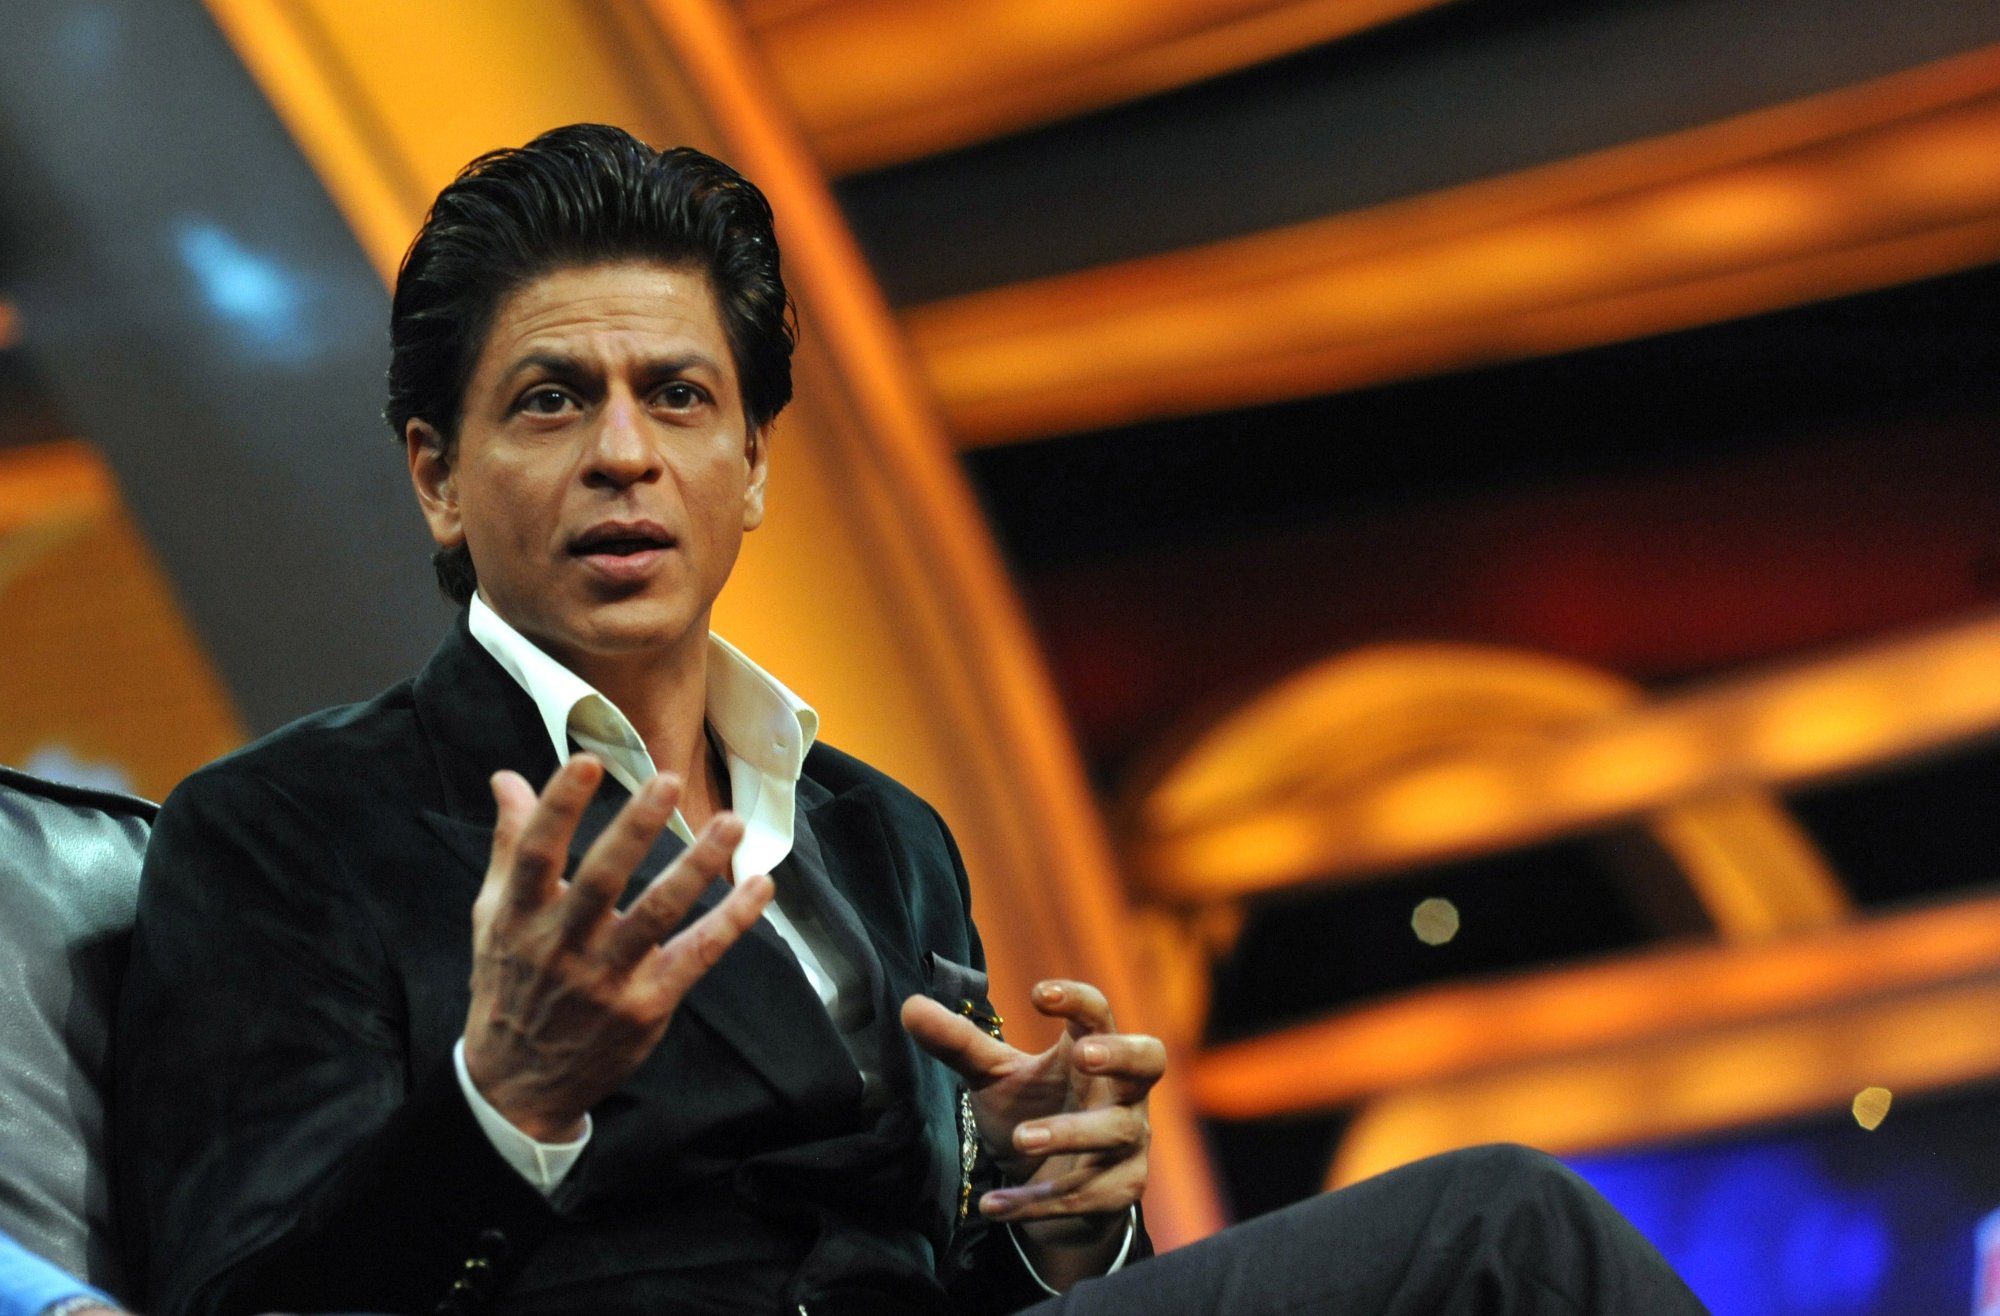 Movie actor Shah Rukh Khan wearing a suit and using his hands to talk